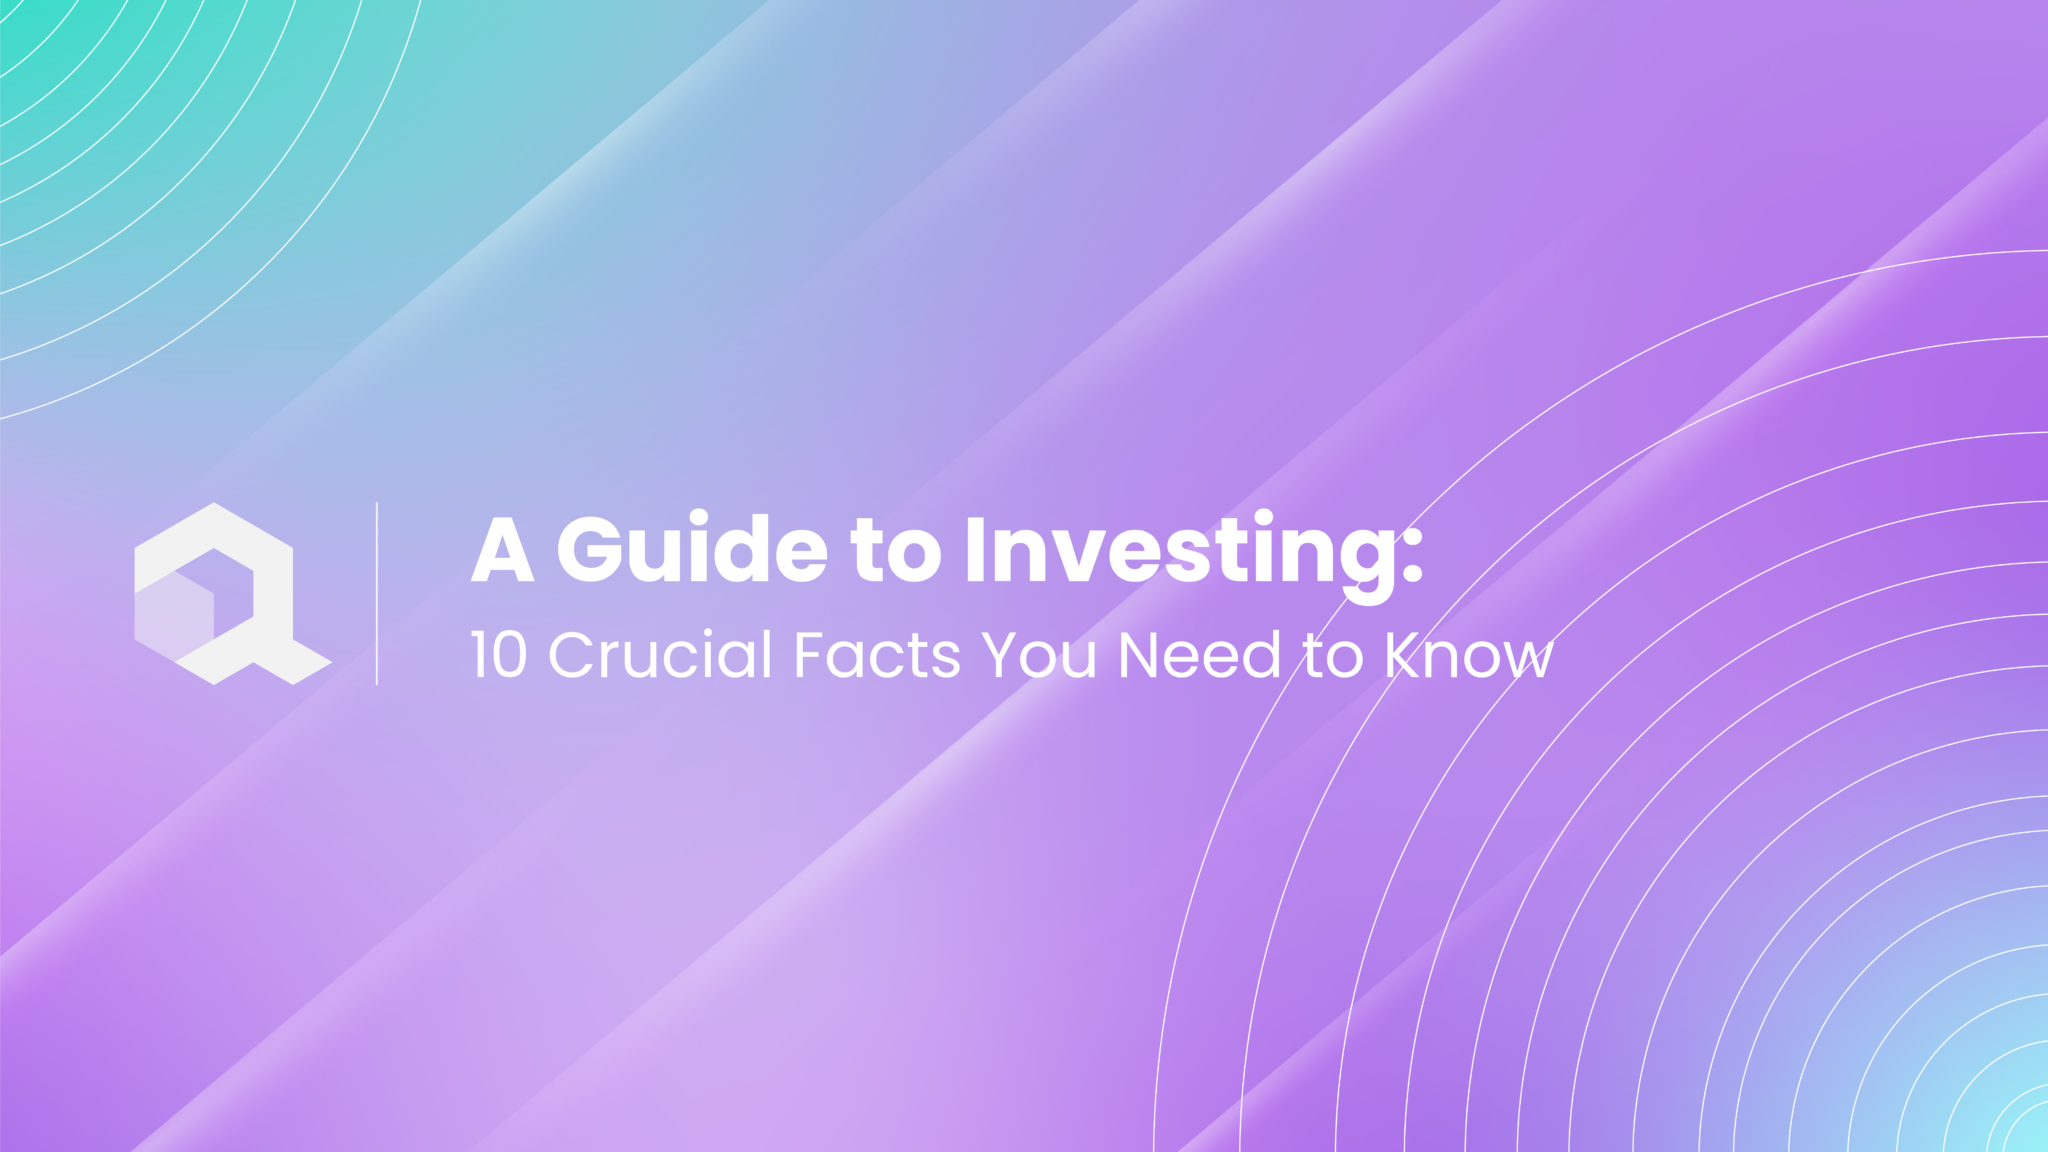 A Guide to Investing 10 Crucial Facts You Need to Know